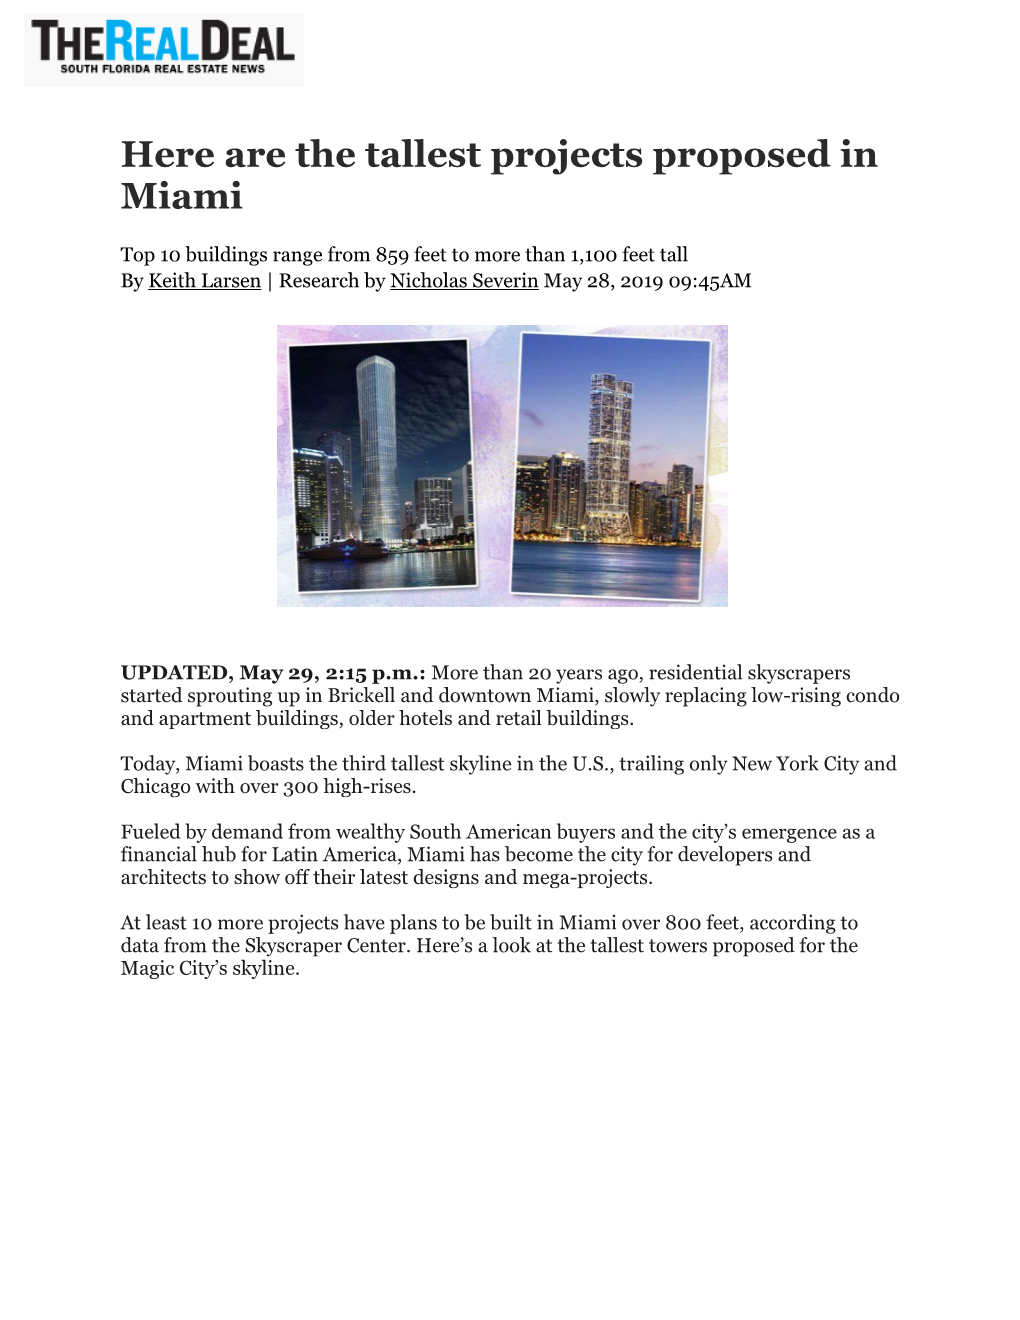 Here Are the Tallest Projects Proposed in Miami